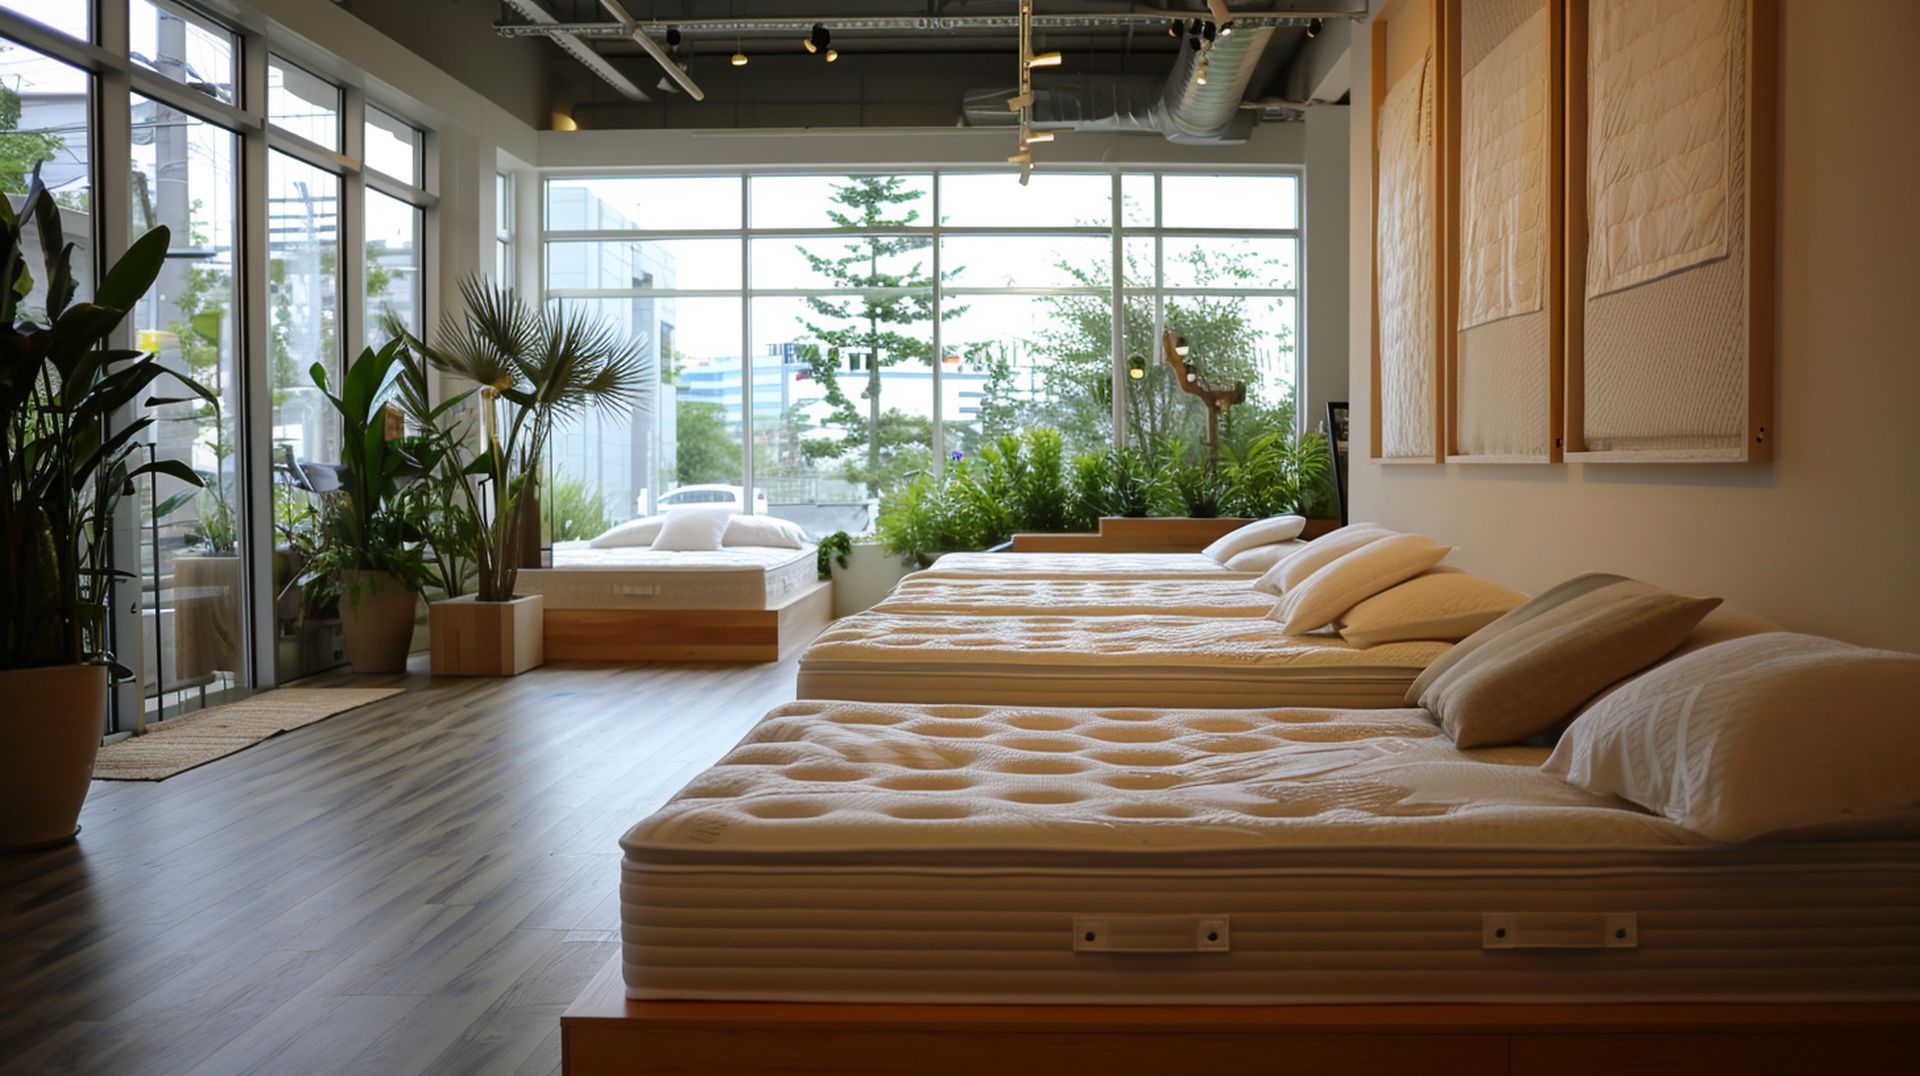 Types of mattresses at mattress dealers in Muncie, IN